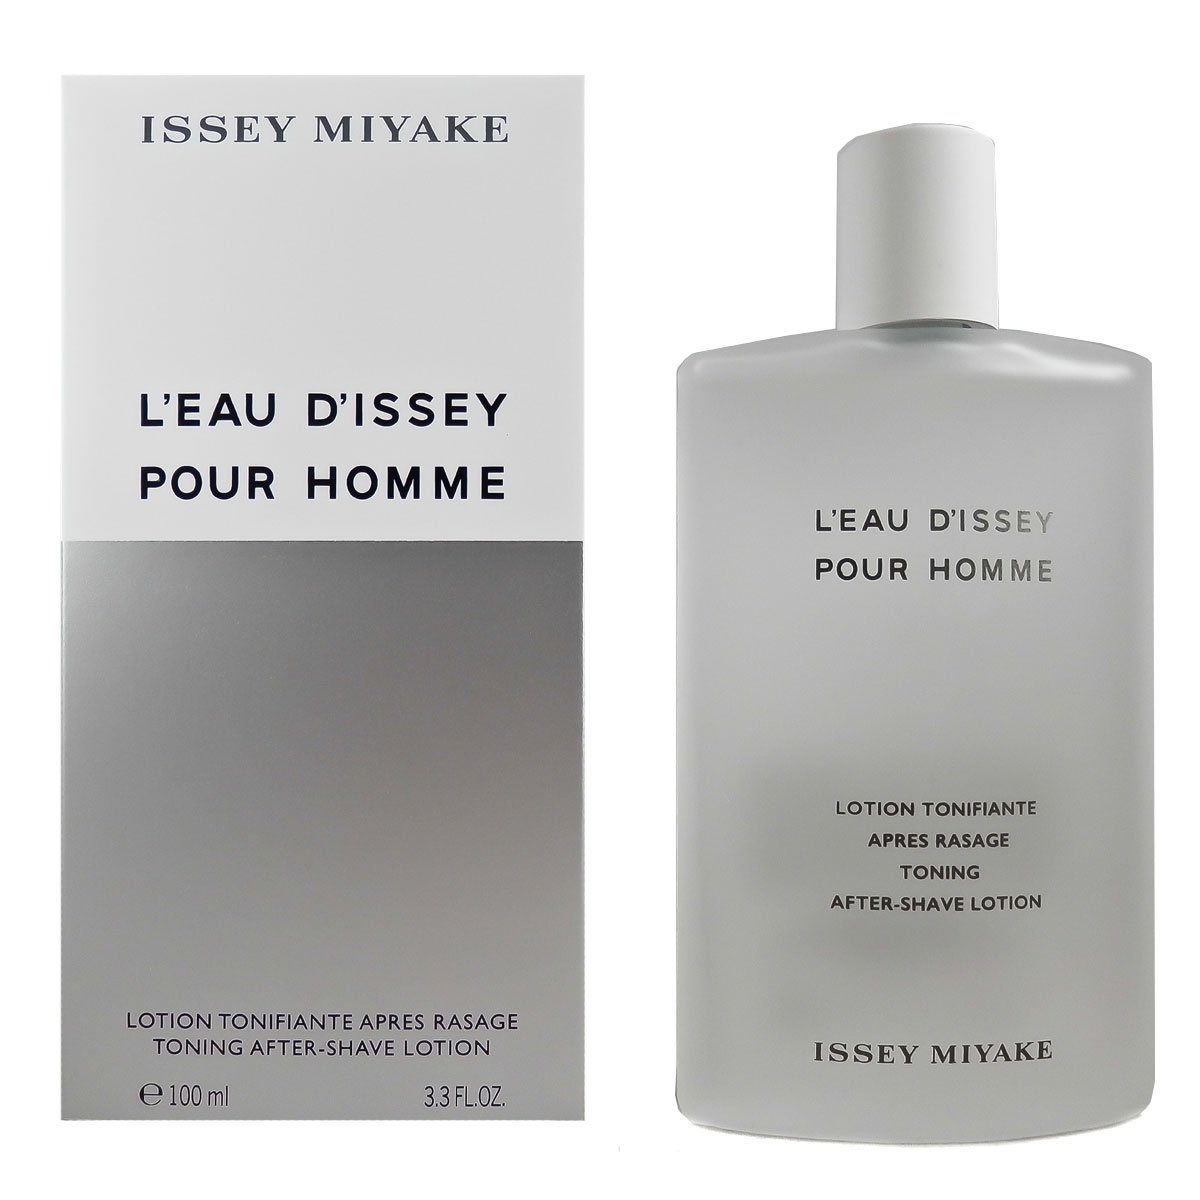 Issey Miyake L'Eau d'Issey Pour Homme Toning Aftershave Lotion 100ml | Perfumes London